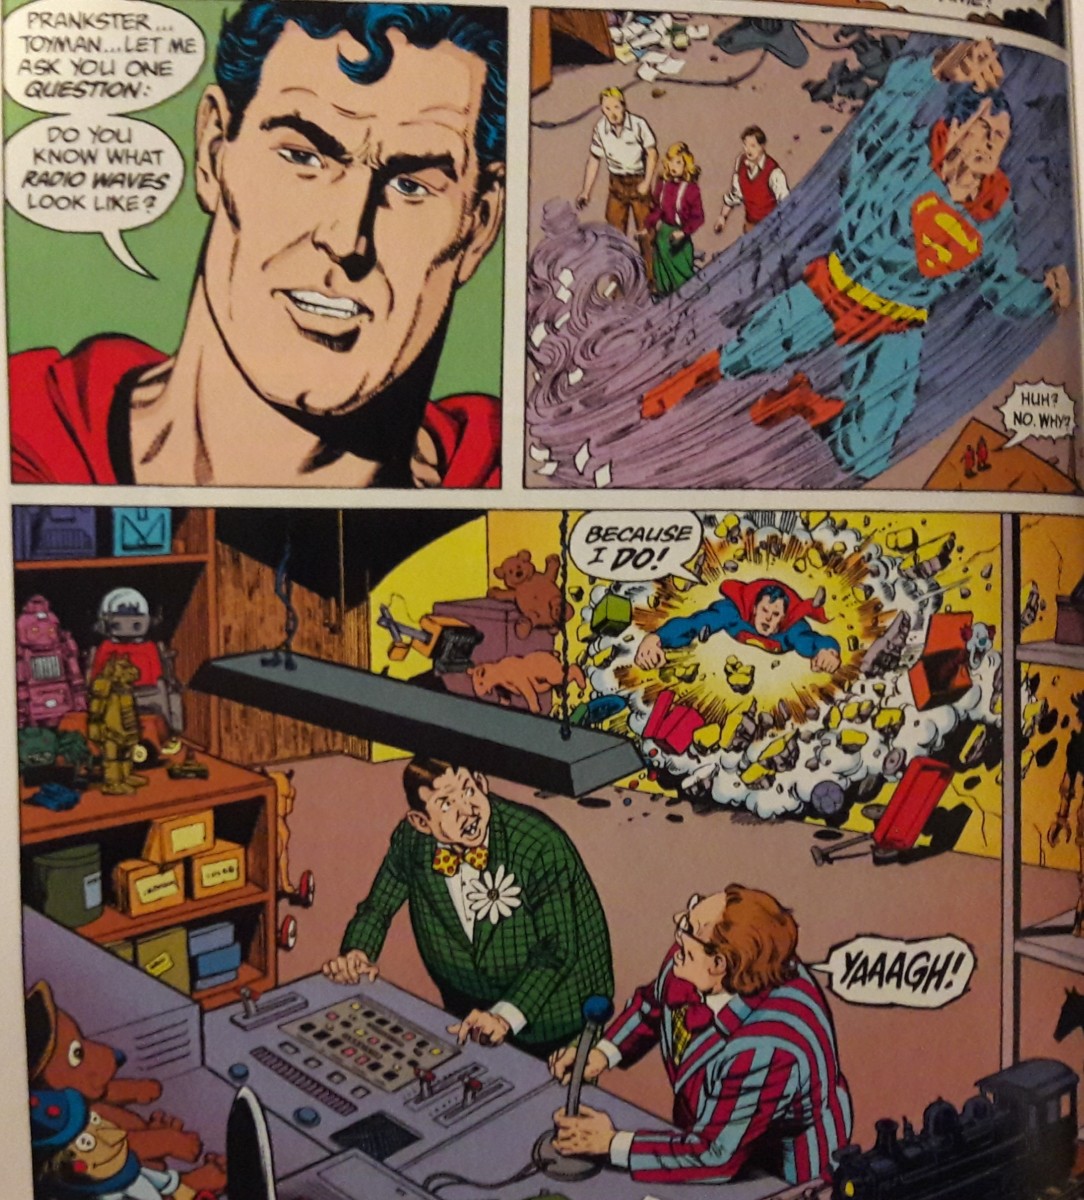 Superman isn't playing games with Toyman or Prankster